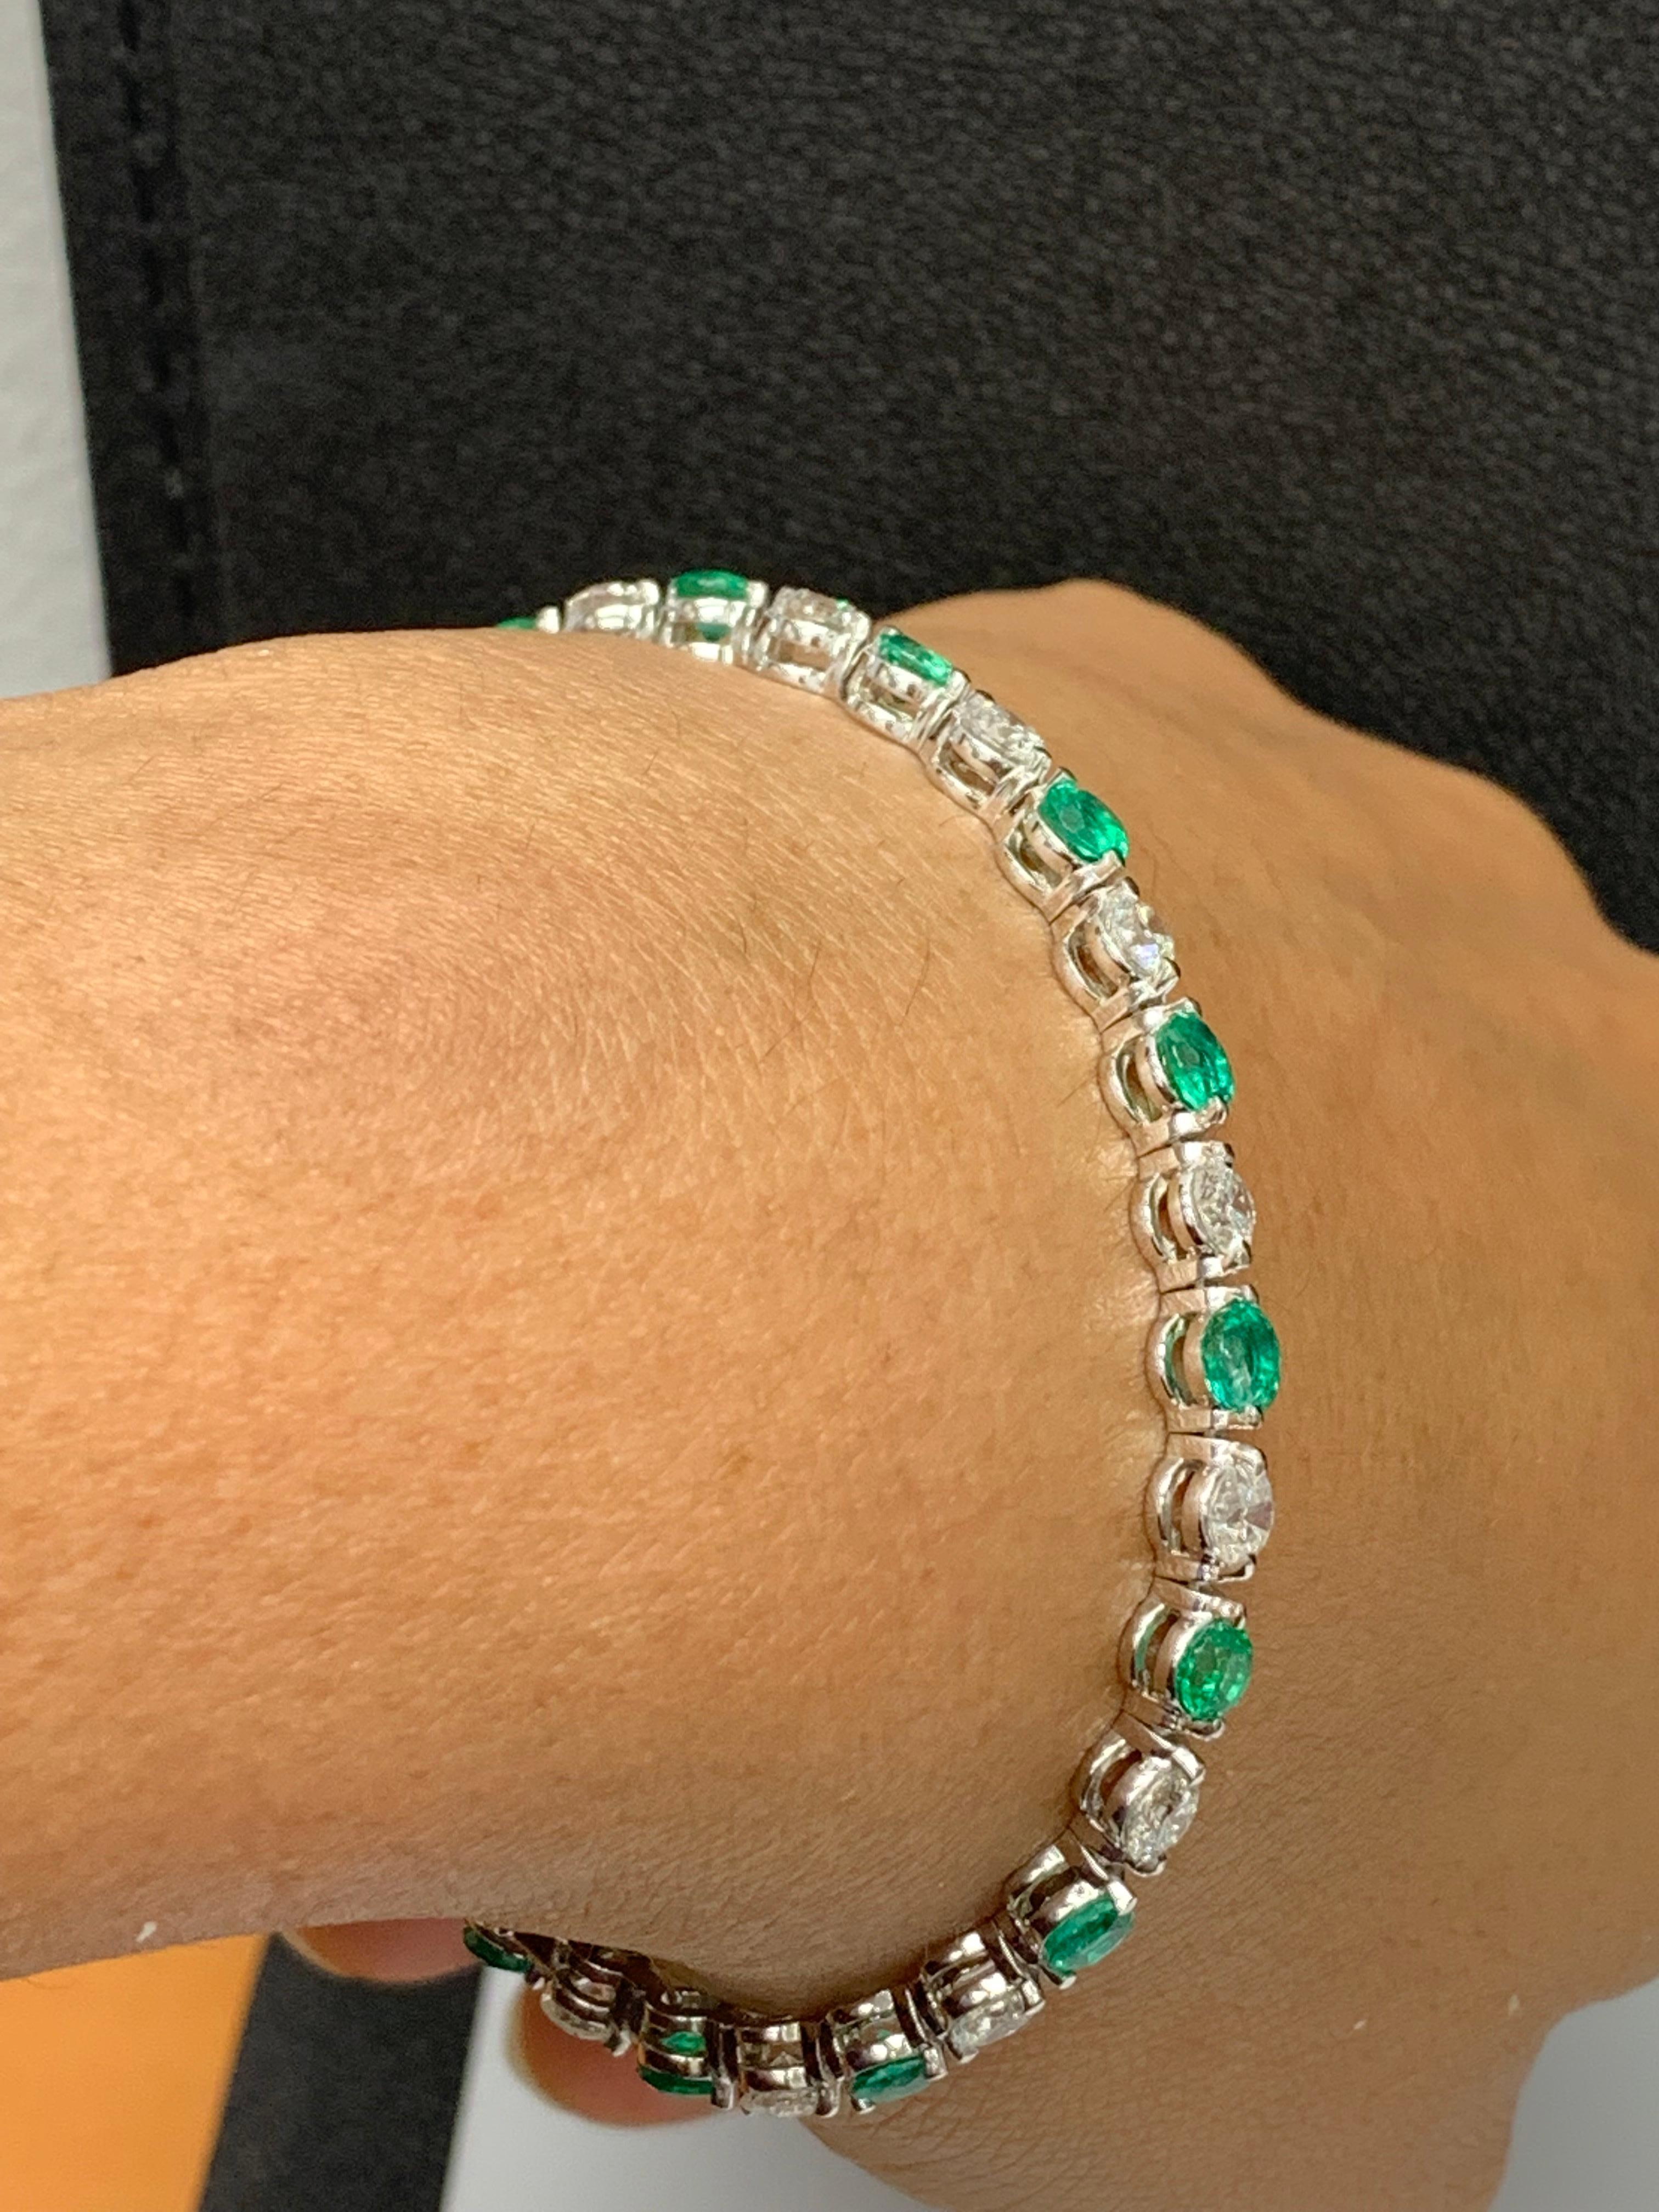 4.07 Carat Round Emerald and Diamond Bracelet in 14K White Gold For Sale 3